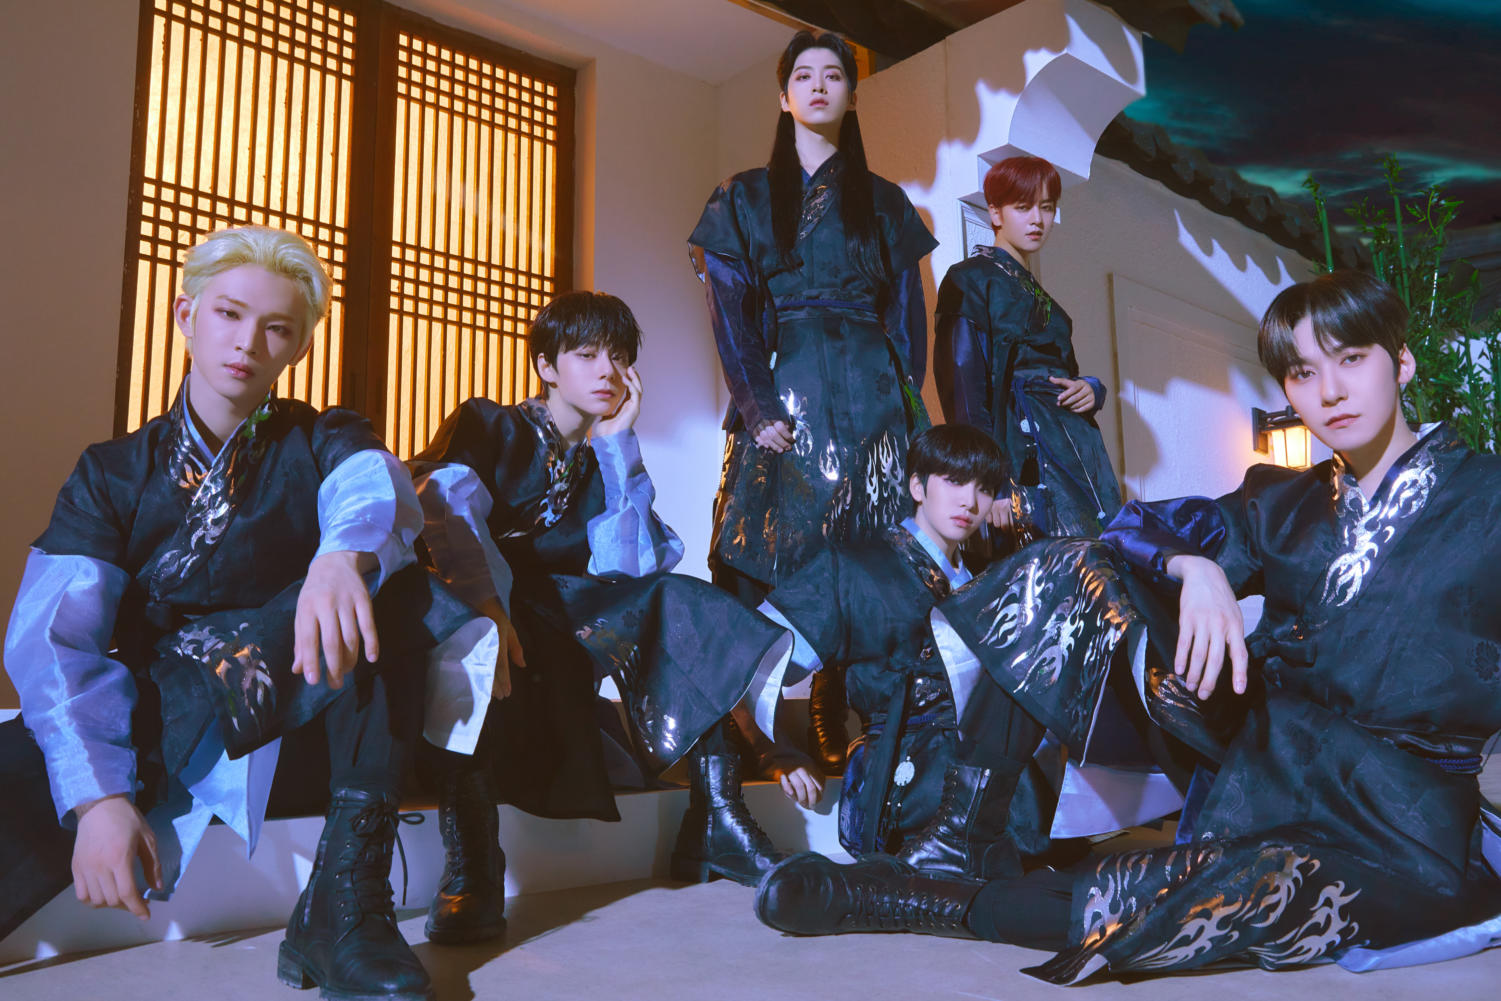 Oneus are arguably in their most visible era thus far.